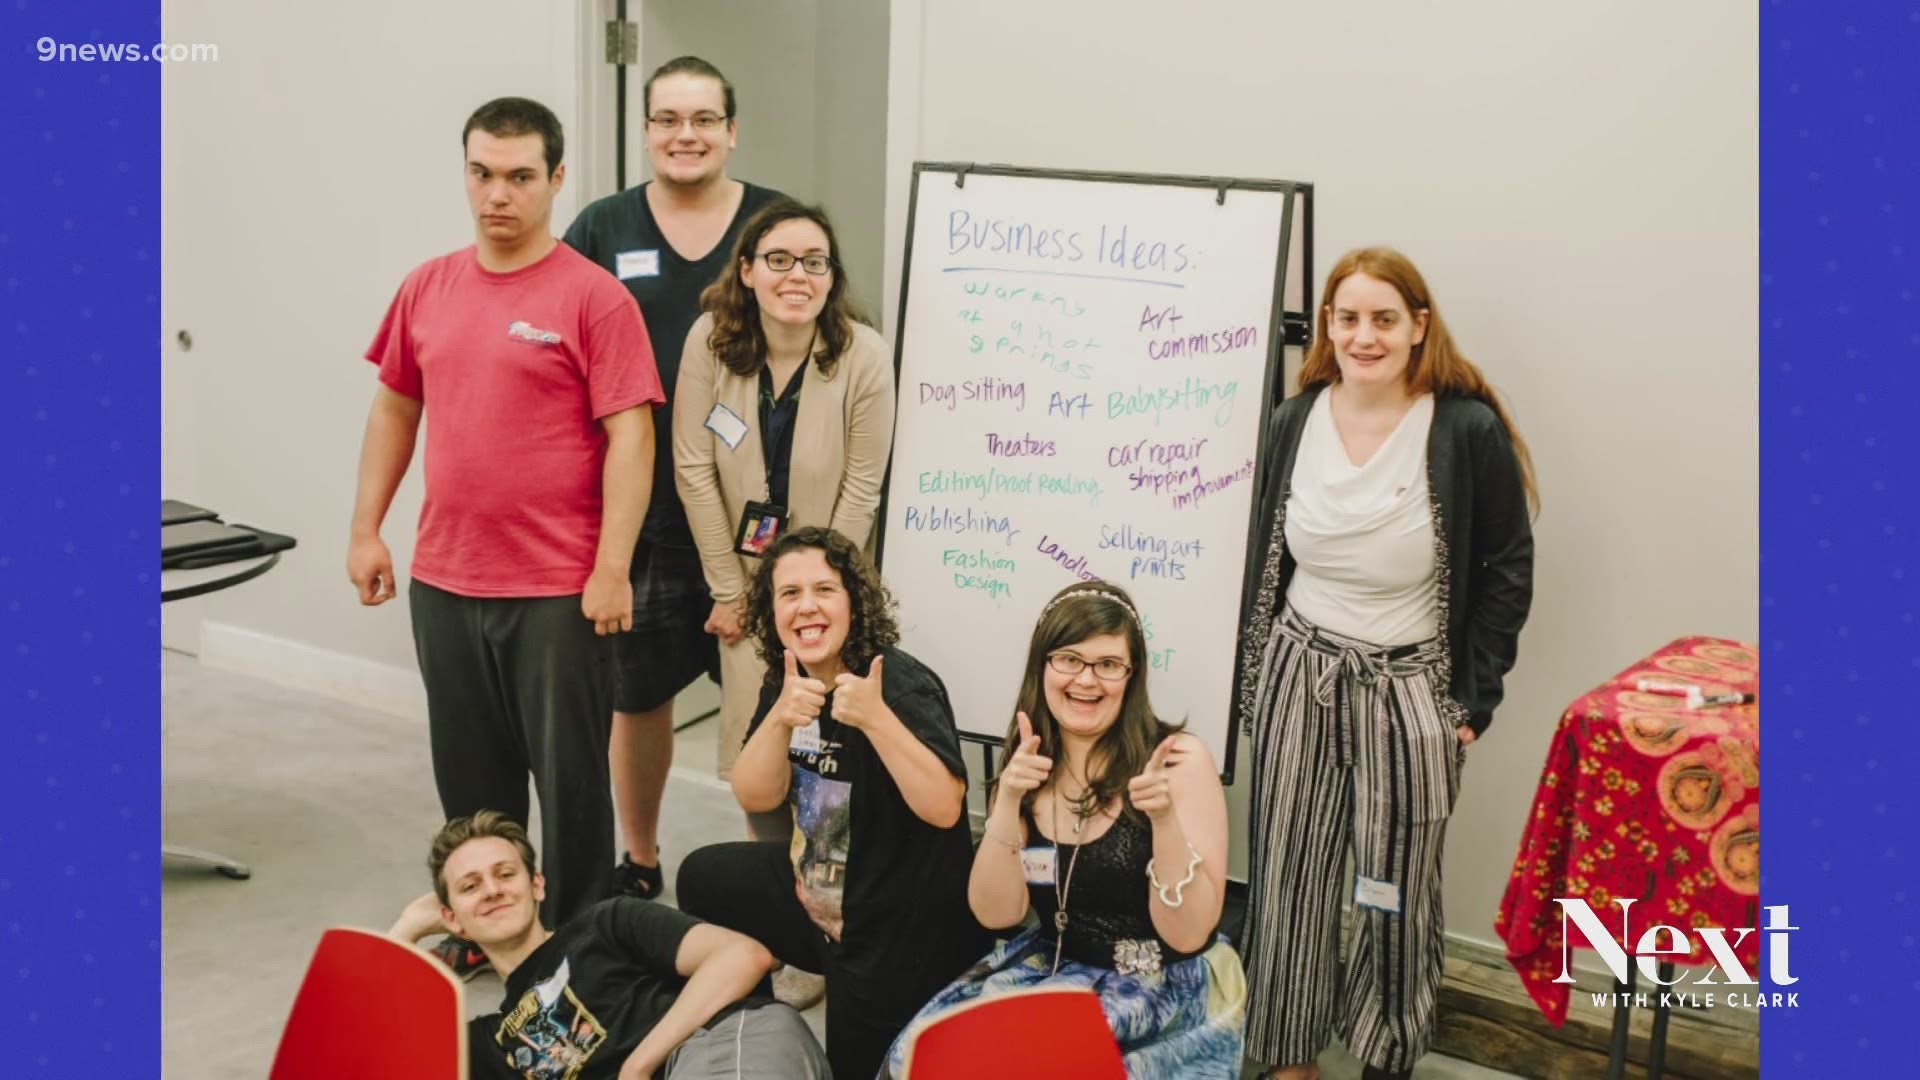 This week, WoT donations will go to Celebrate EDU, which provides tools and training to people with disabilities to help them find work or even start a business.